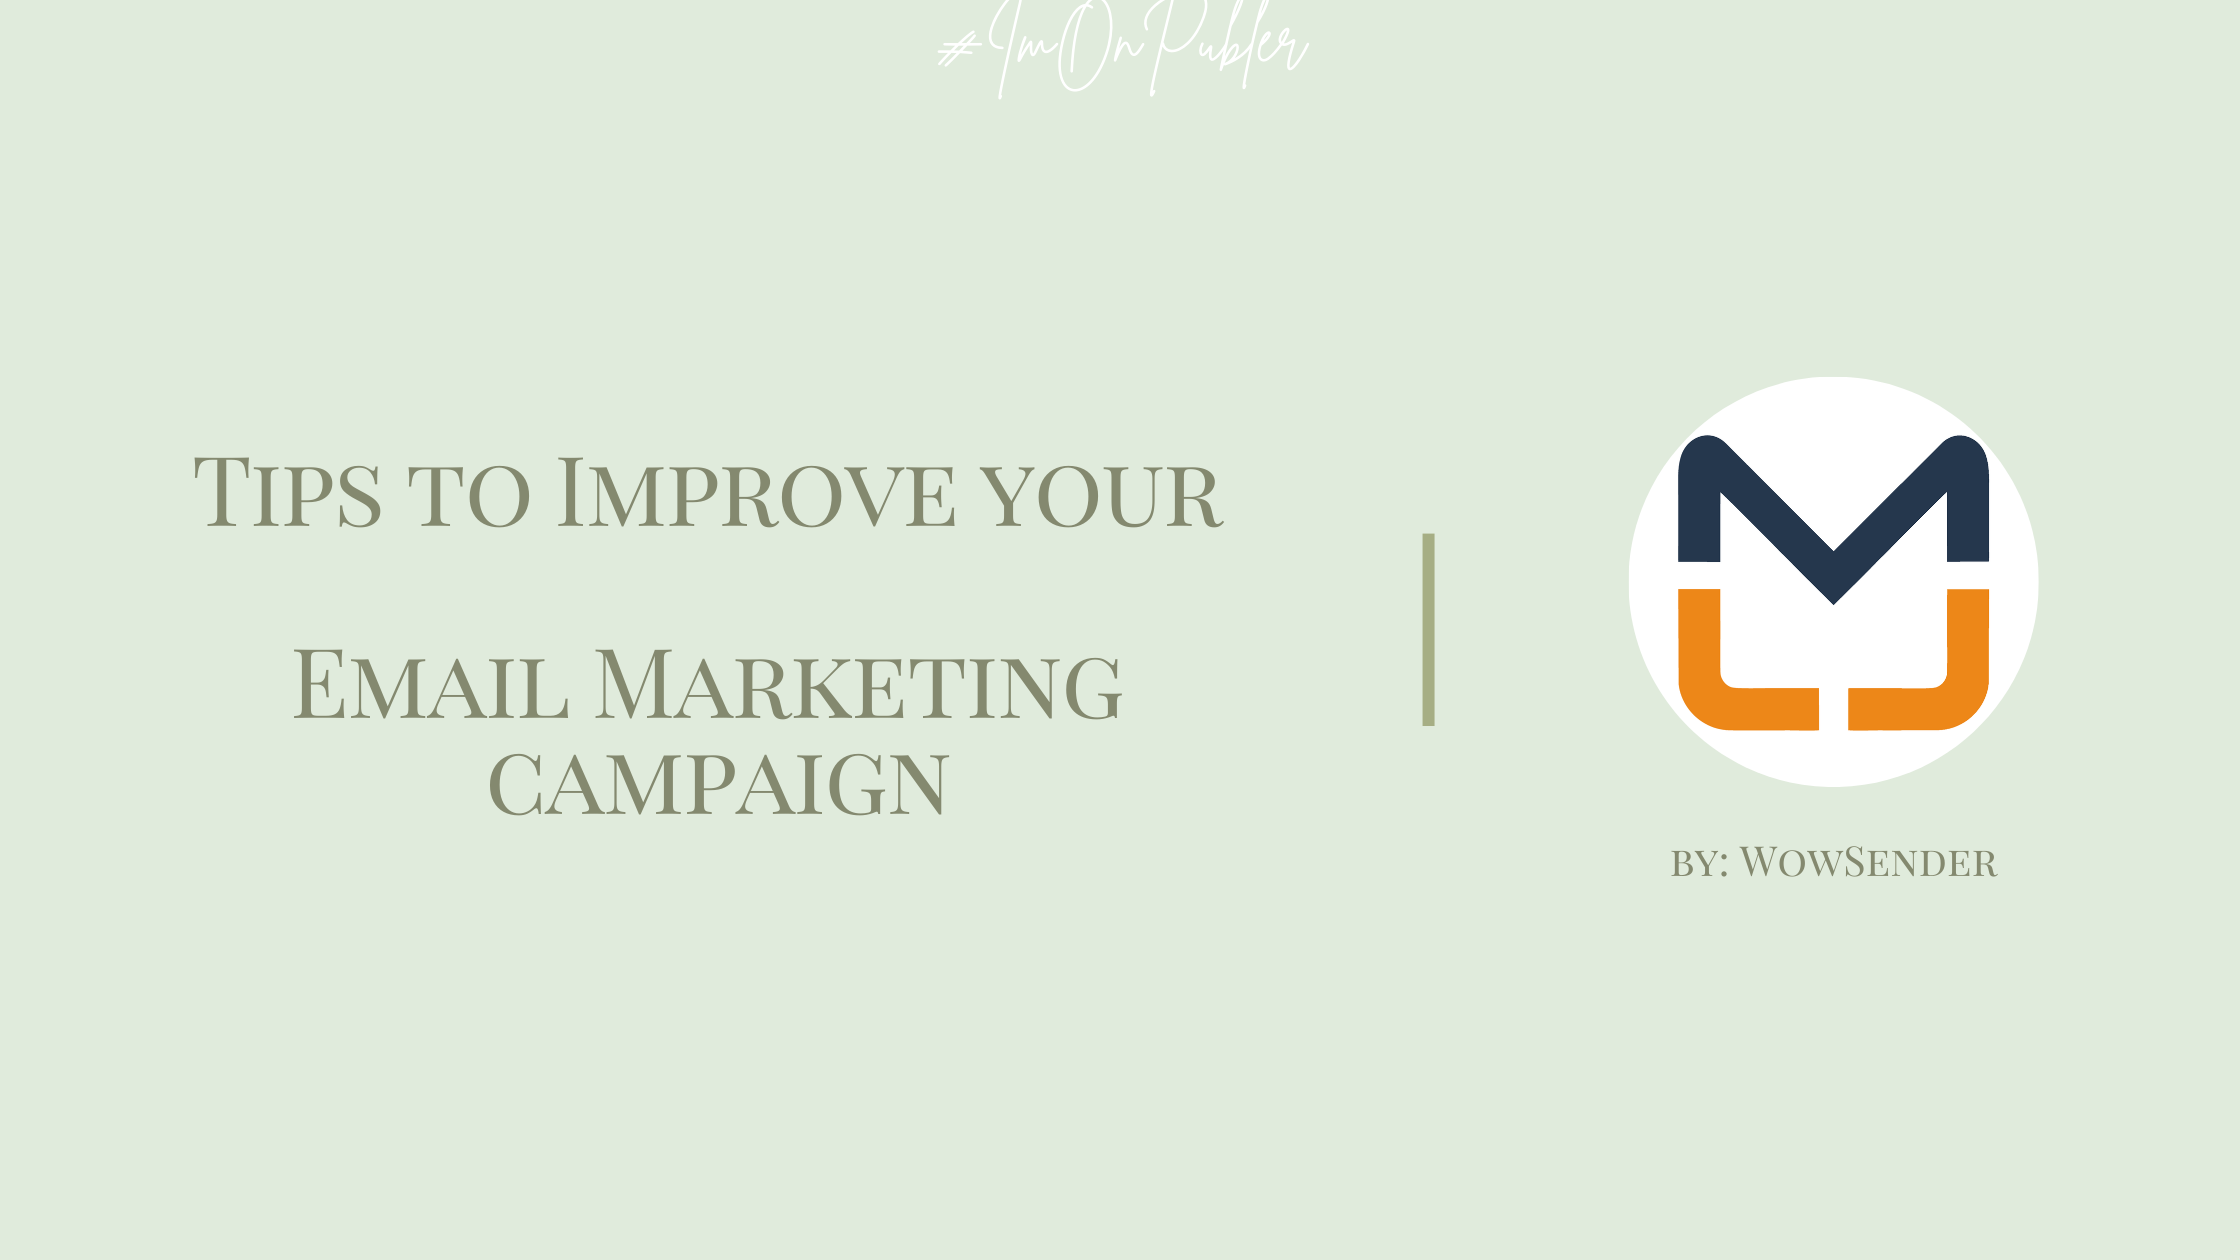 Tips to improve your email marketing campaign by WowSender